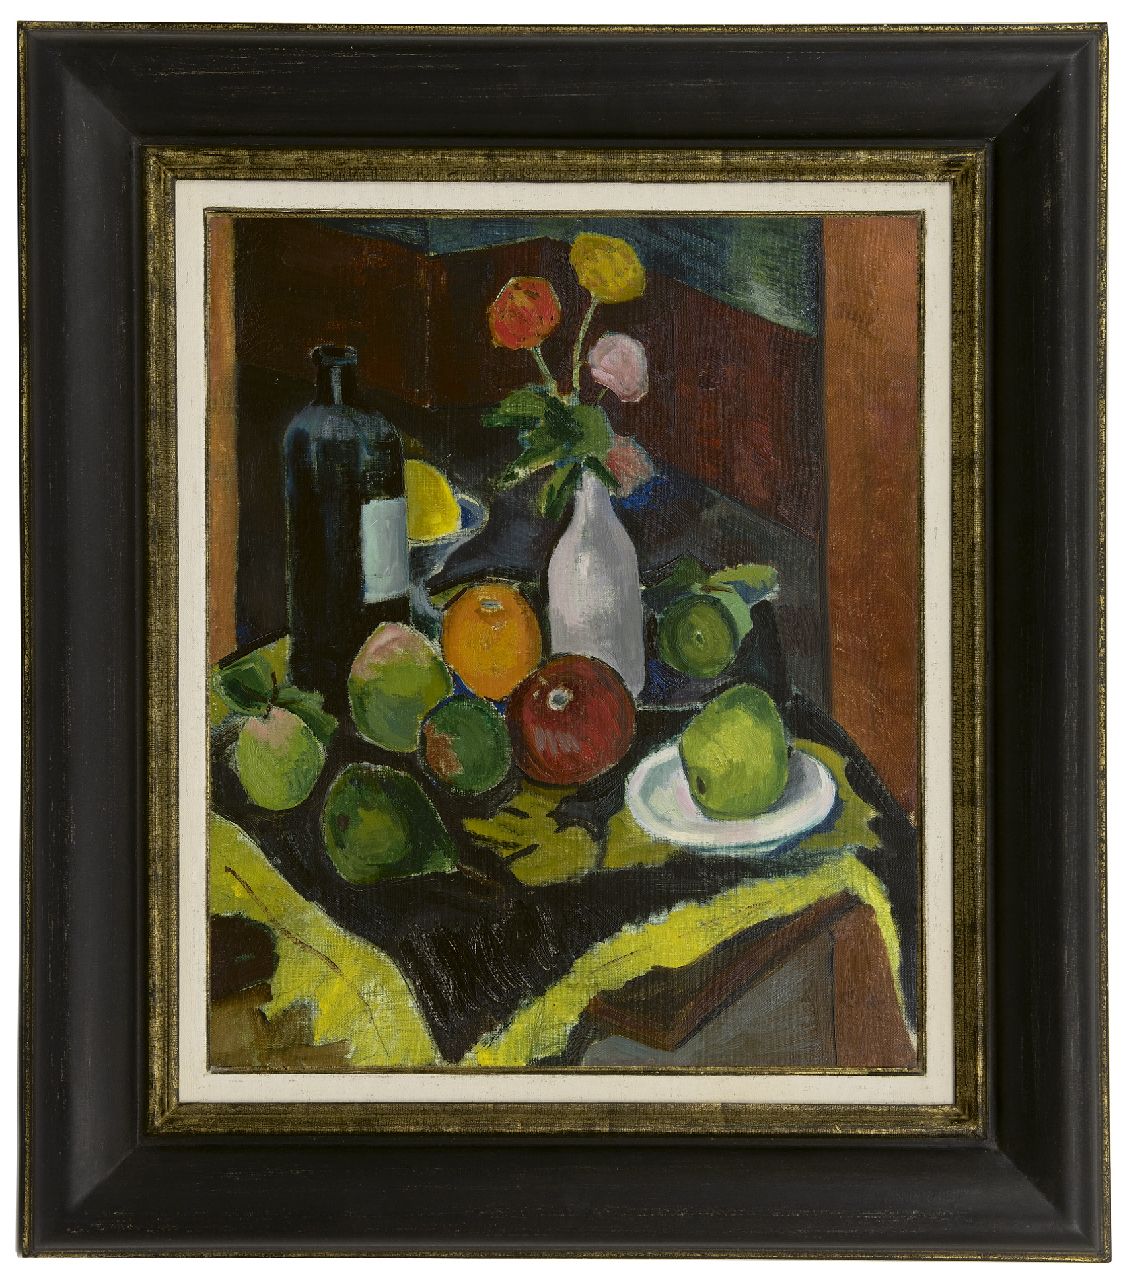 Schelfhout L.  | Lodewijk Schelfhout, A still life with fruit, flowers and a bottle, oil on canvas 55.5 x 46.0 cm, signed l.r. and dated 1908